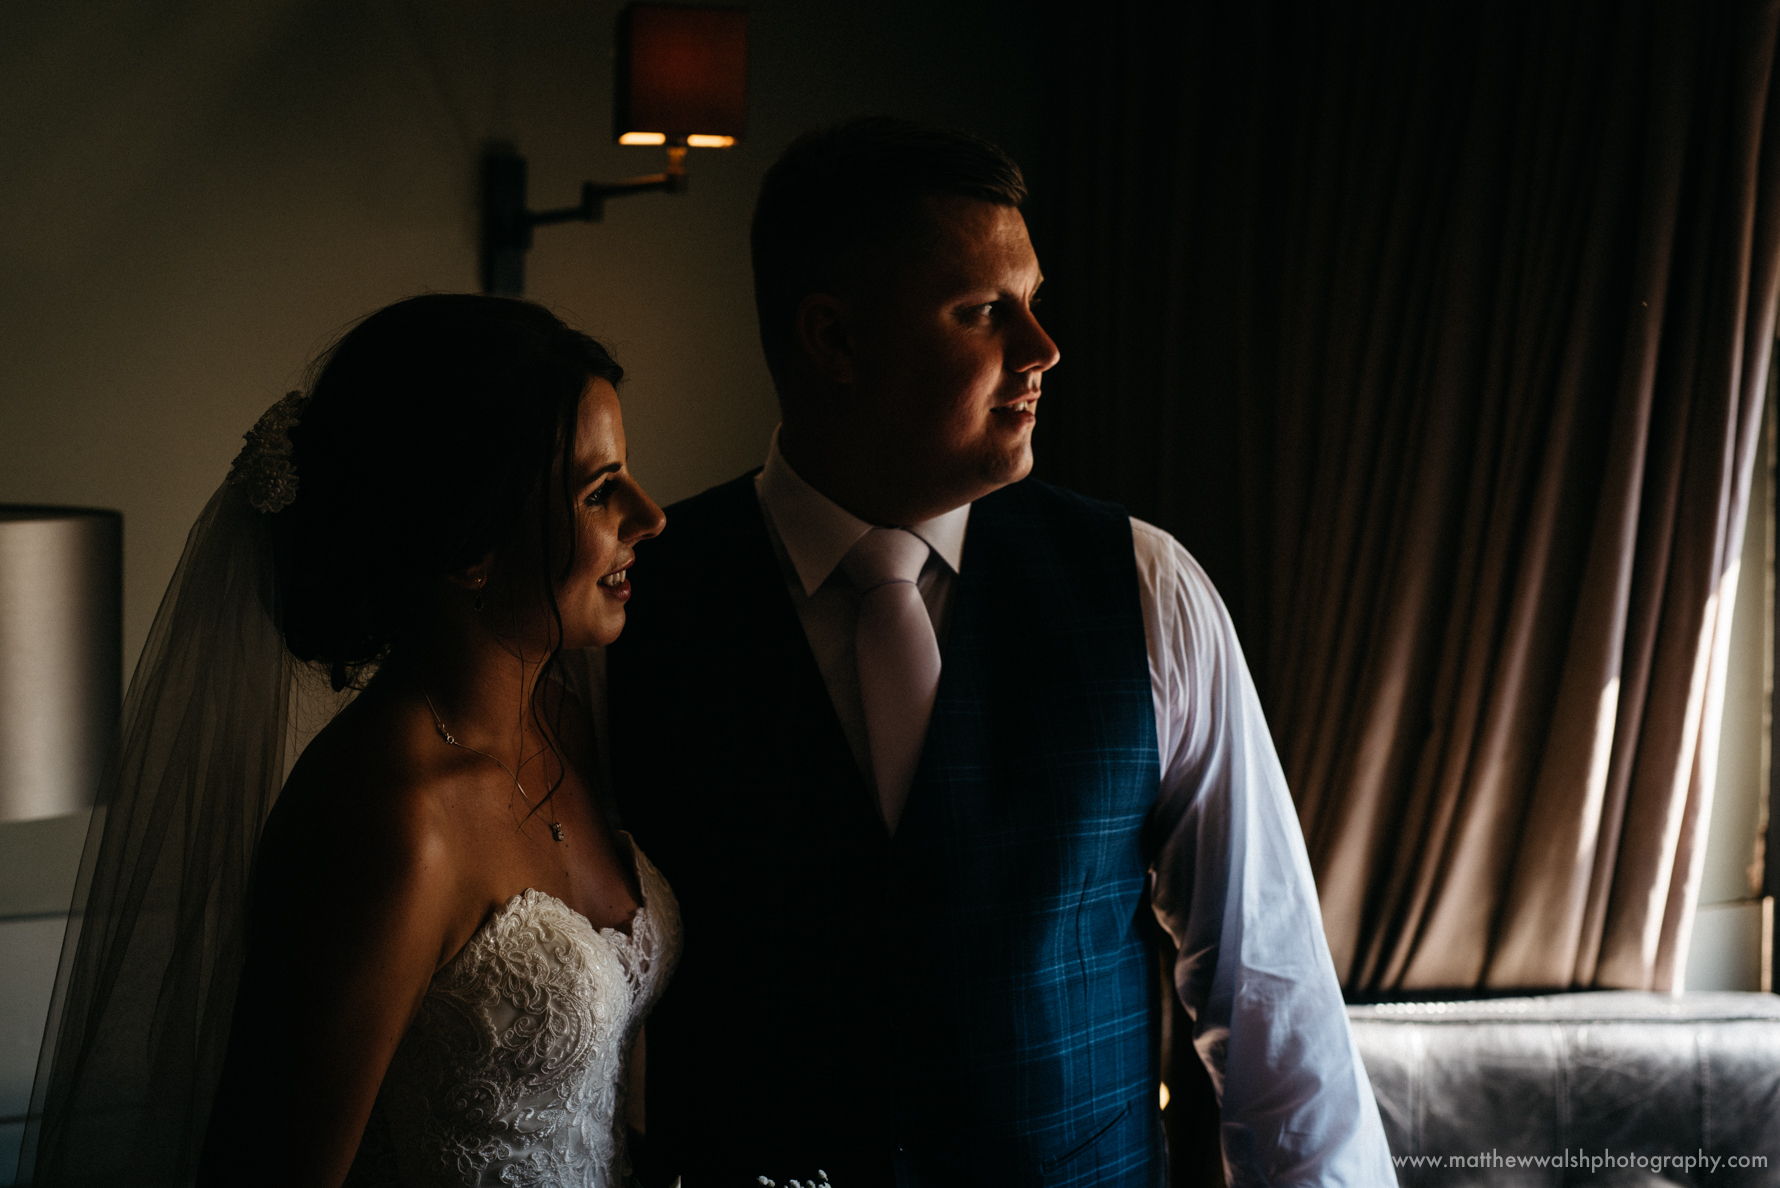 The happy couple in the glow of natural light